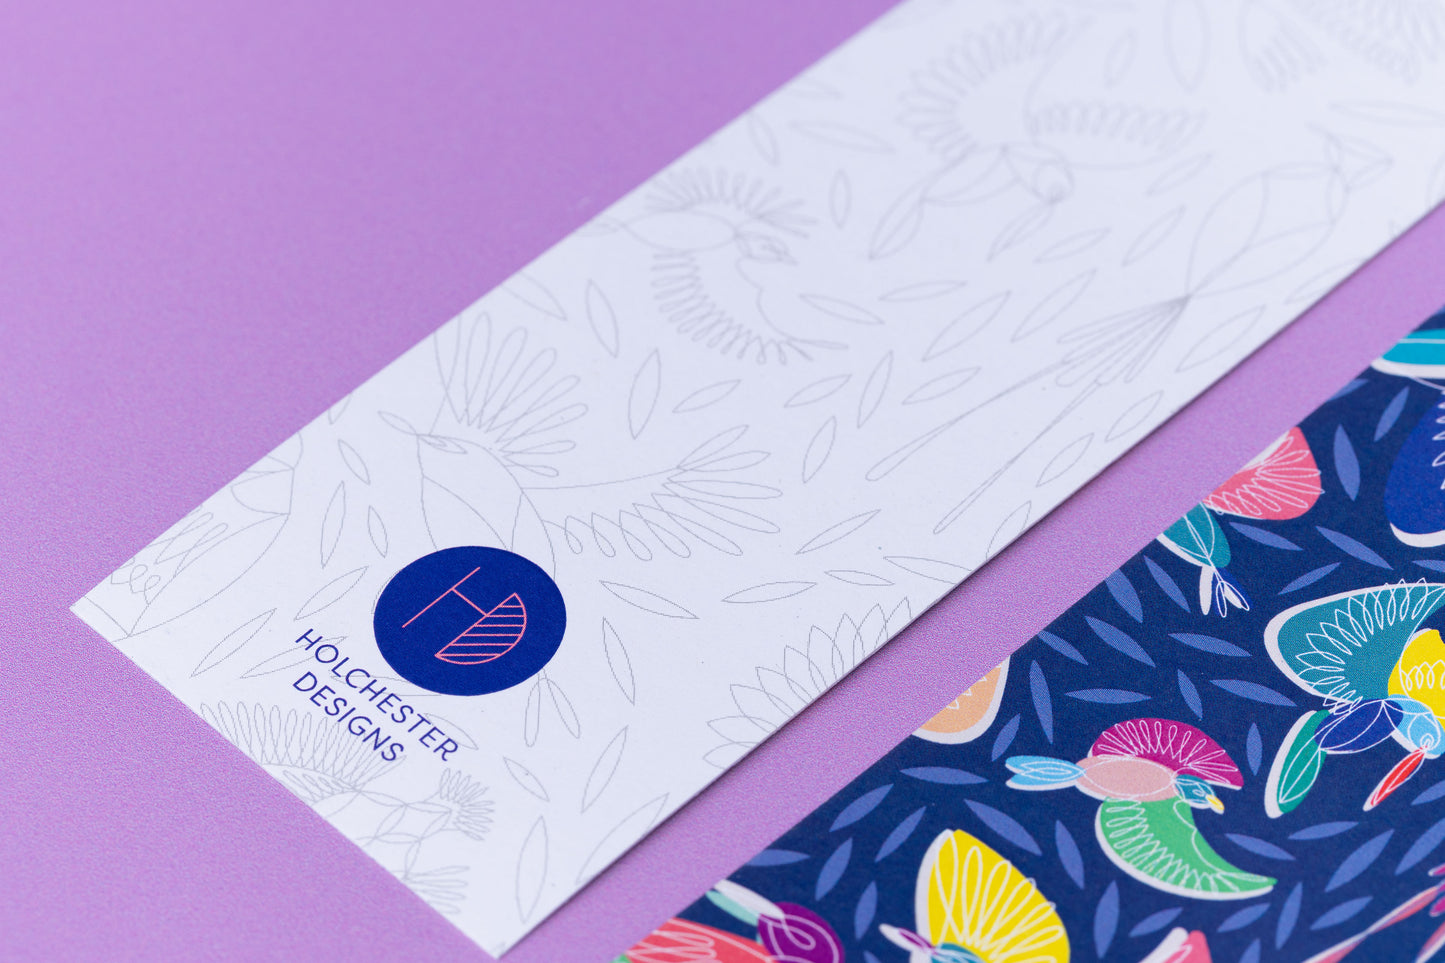 Two of the paradise double-sided bookmarks, on a lilac desk. The main focus is on the bottom of the monochrome side of the bookmark, with the Holchester Designs Logo.  The full-pattern side of the bookmark is in the bottom right corner slightly out of focus.